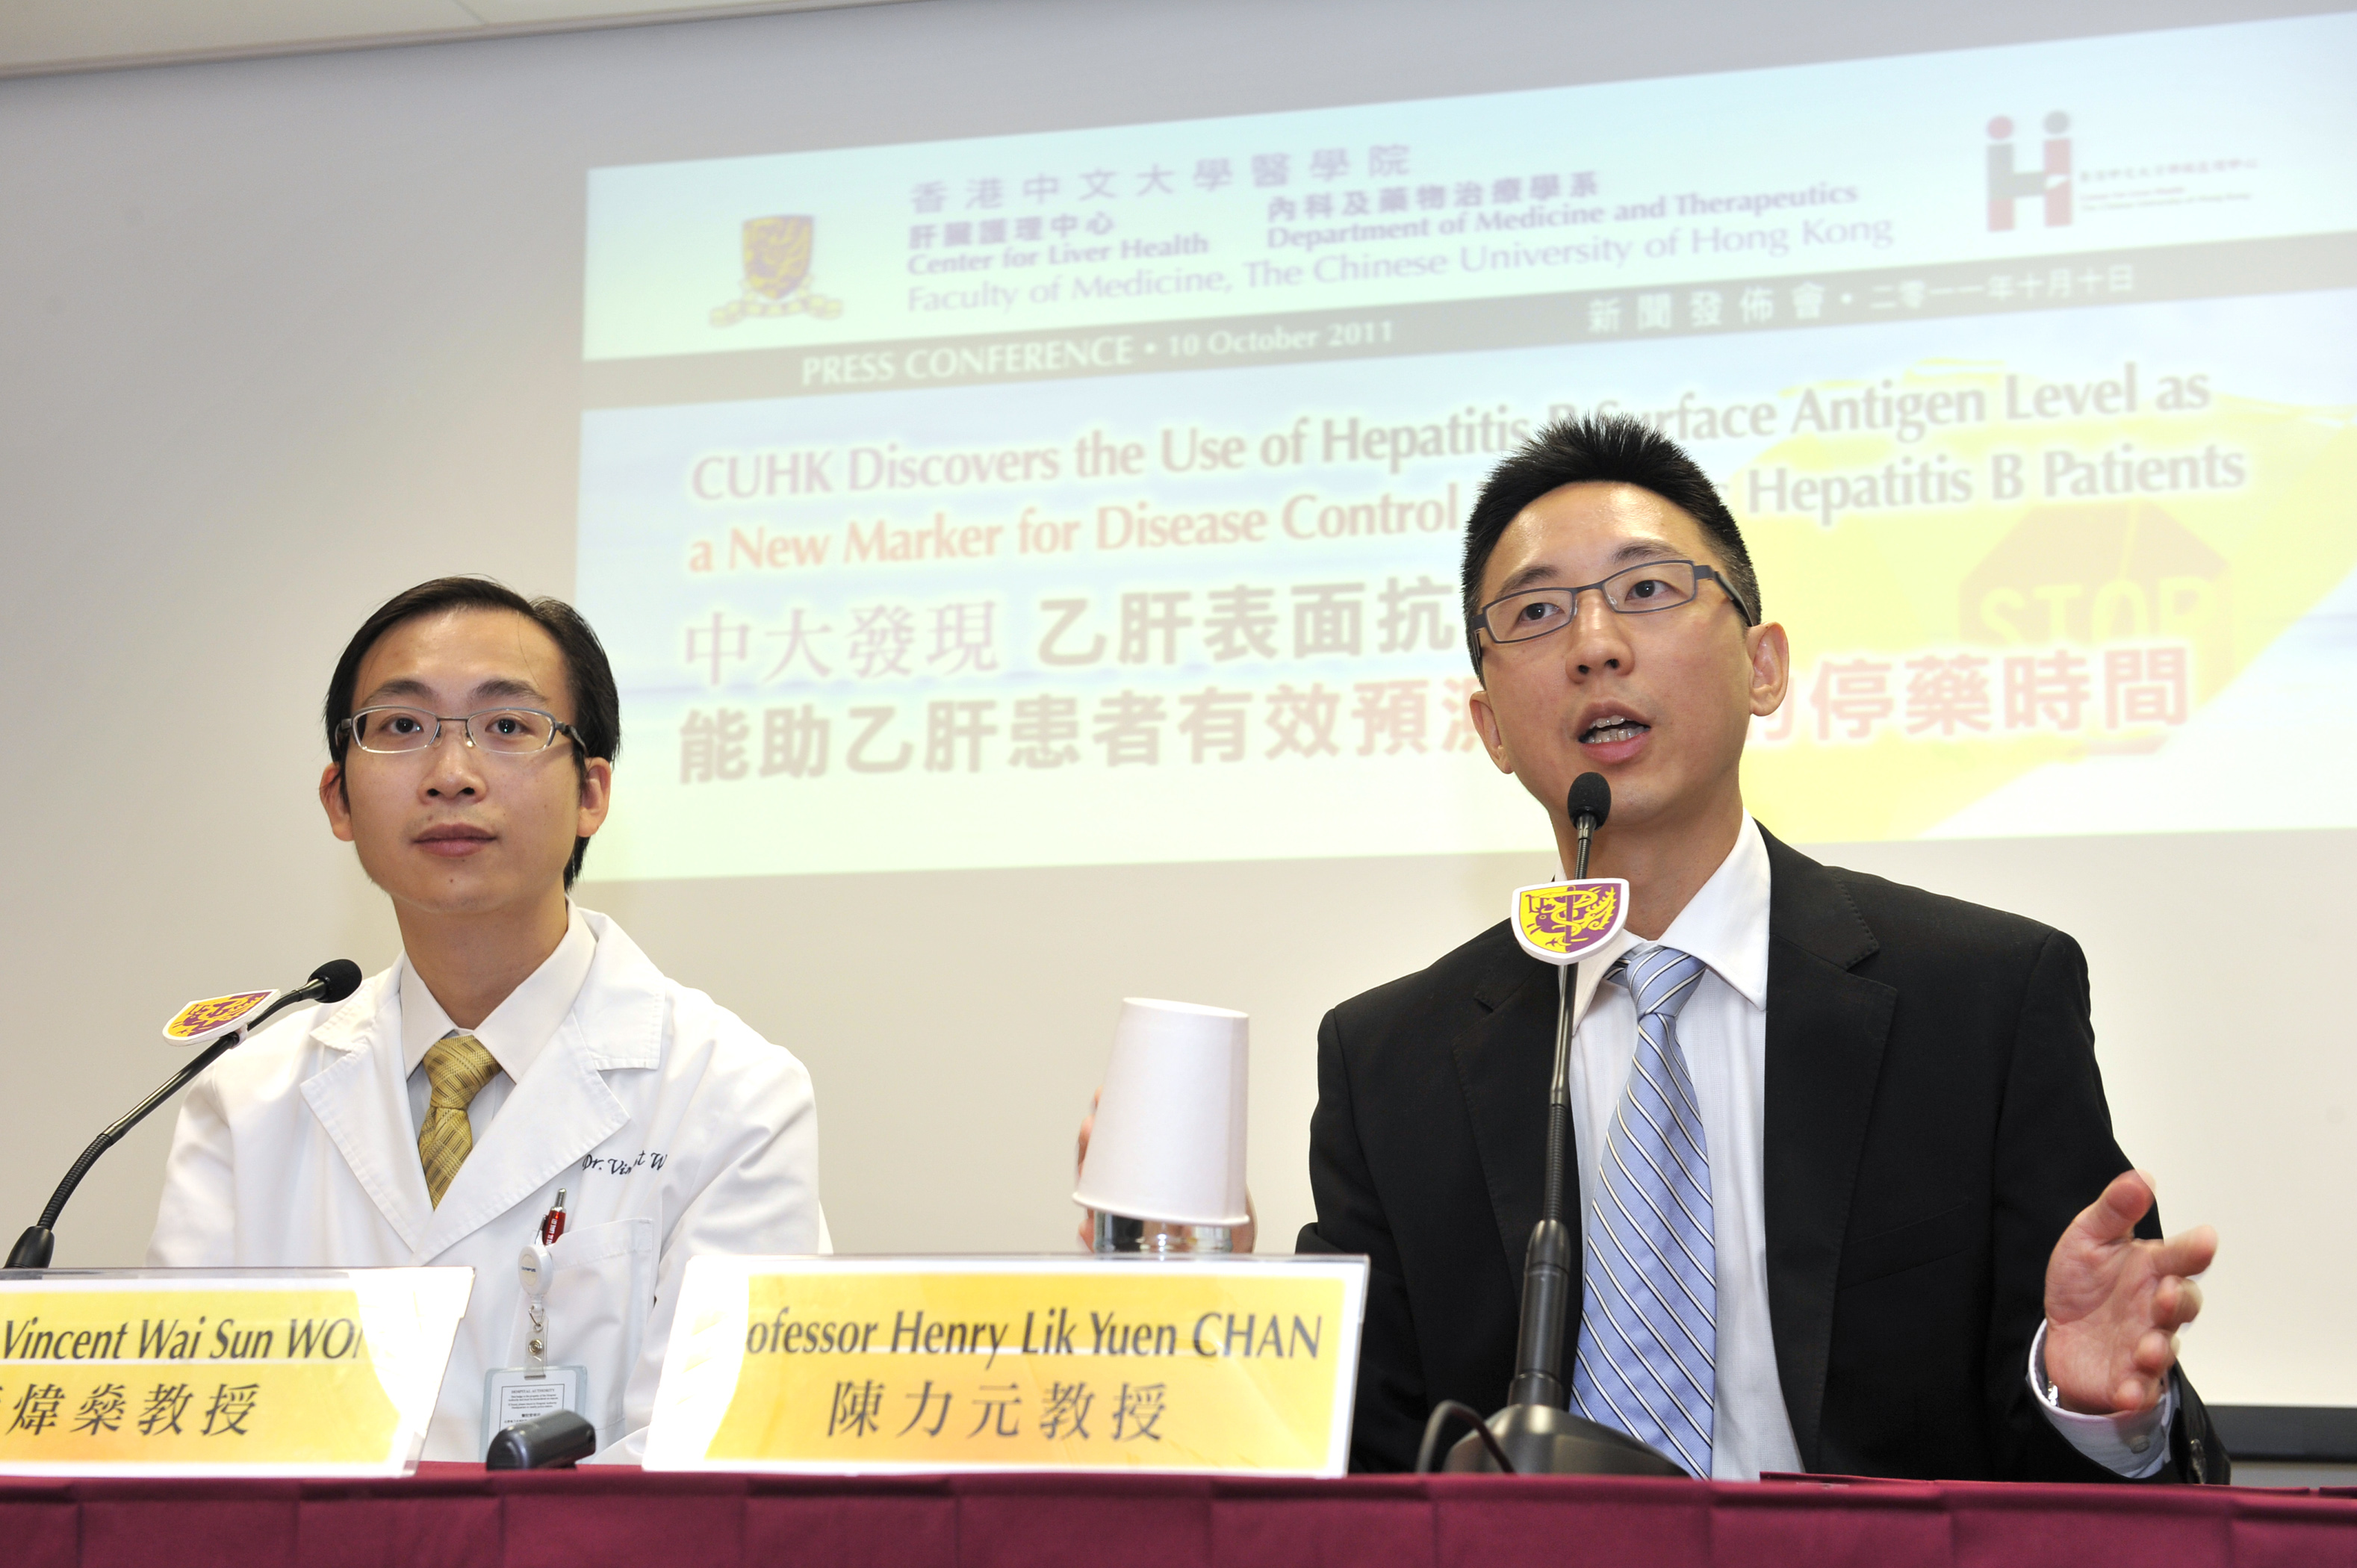 Professor Henry Lik Yuen CHAN (right), Director, the Center for Liver Health; and Professor Vincent Wai Sun WONG, Associate Professor, Department of Medicine and Therapeutics at CUHK revealed the latest research findings on monitoring of Hepatitis B Surface Antigen Level (HBsAg) as a new marker for disease control in chronic hepatitis B patients.